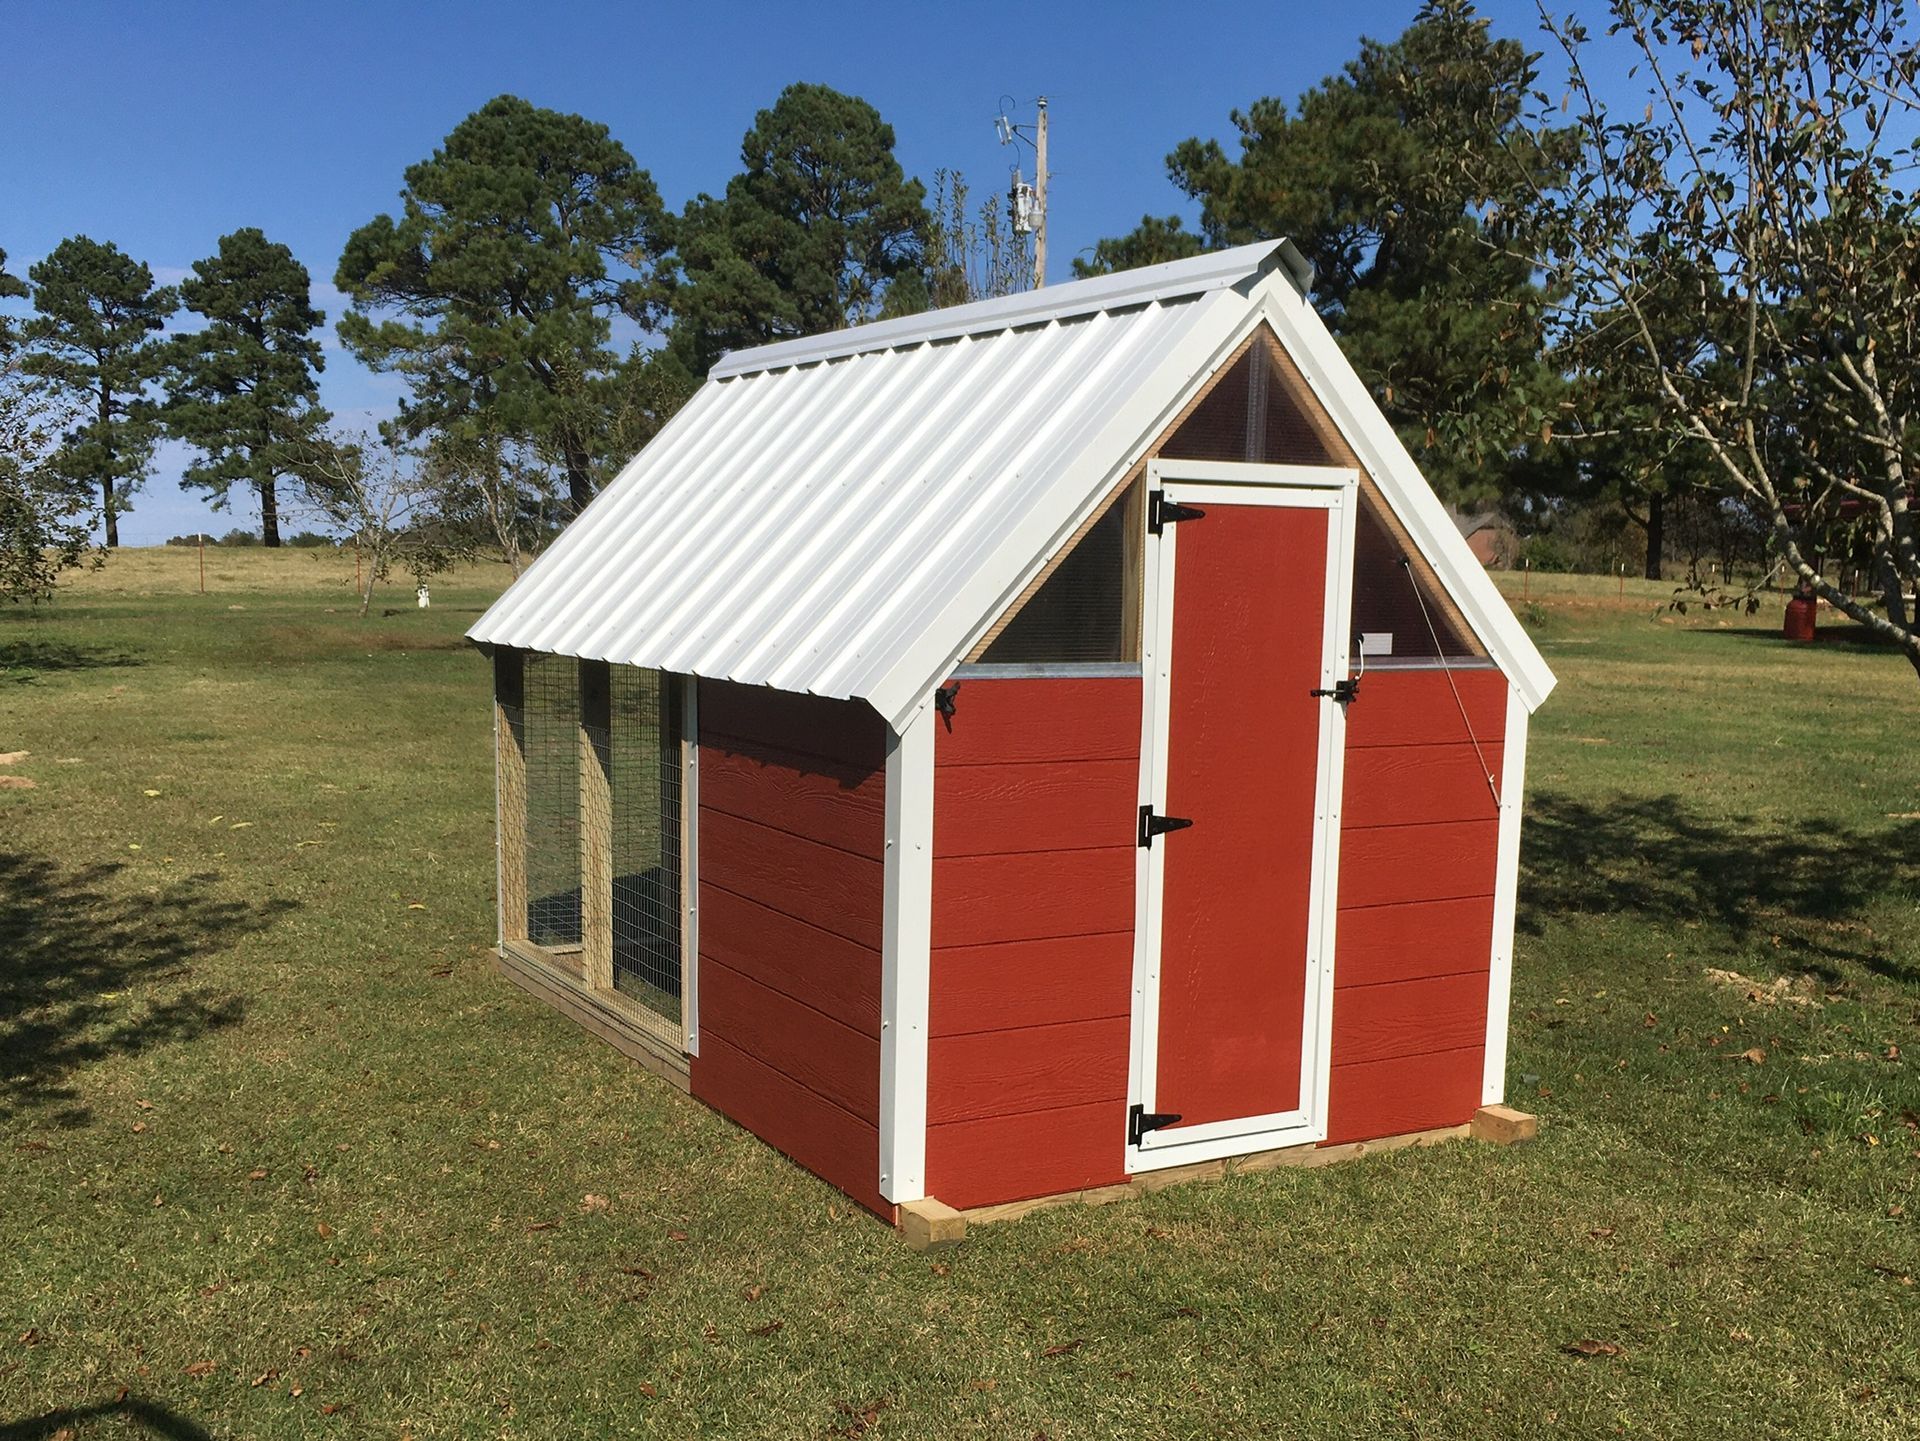 a red and white chicken coop is sitting in the middle of a grassy field .